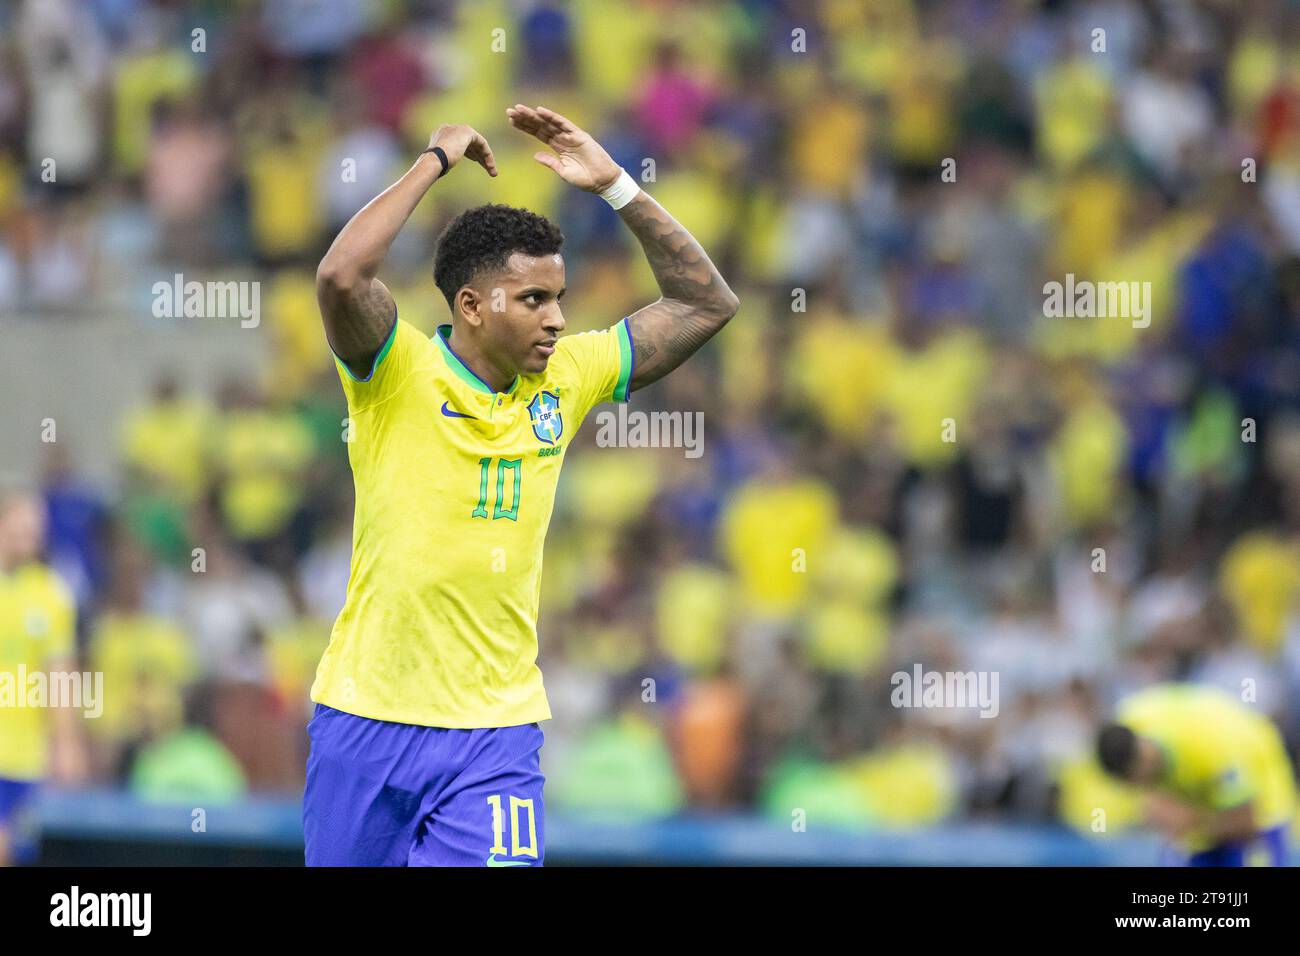 Rio De Janeiro, Brazil. 21st Nov, 2023. RIO DE JANEIRO, BRAZIL - NOVEMBER 21: Rodrygo of Brazil reacts during a match between Brazil and Argentina as part of 2026 FIFA World Cup South American Qualification at Maracana Stadium on November 21, 2023 in Rio de Janeiro, Brazil. (Photo by Wanderson Oliveira/PxImages) Credit: Px Images/Alamy Live News Stock Photo